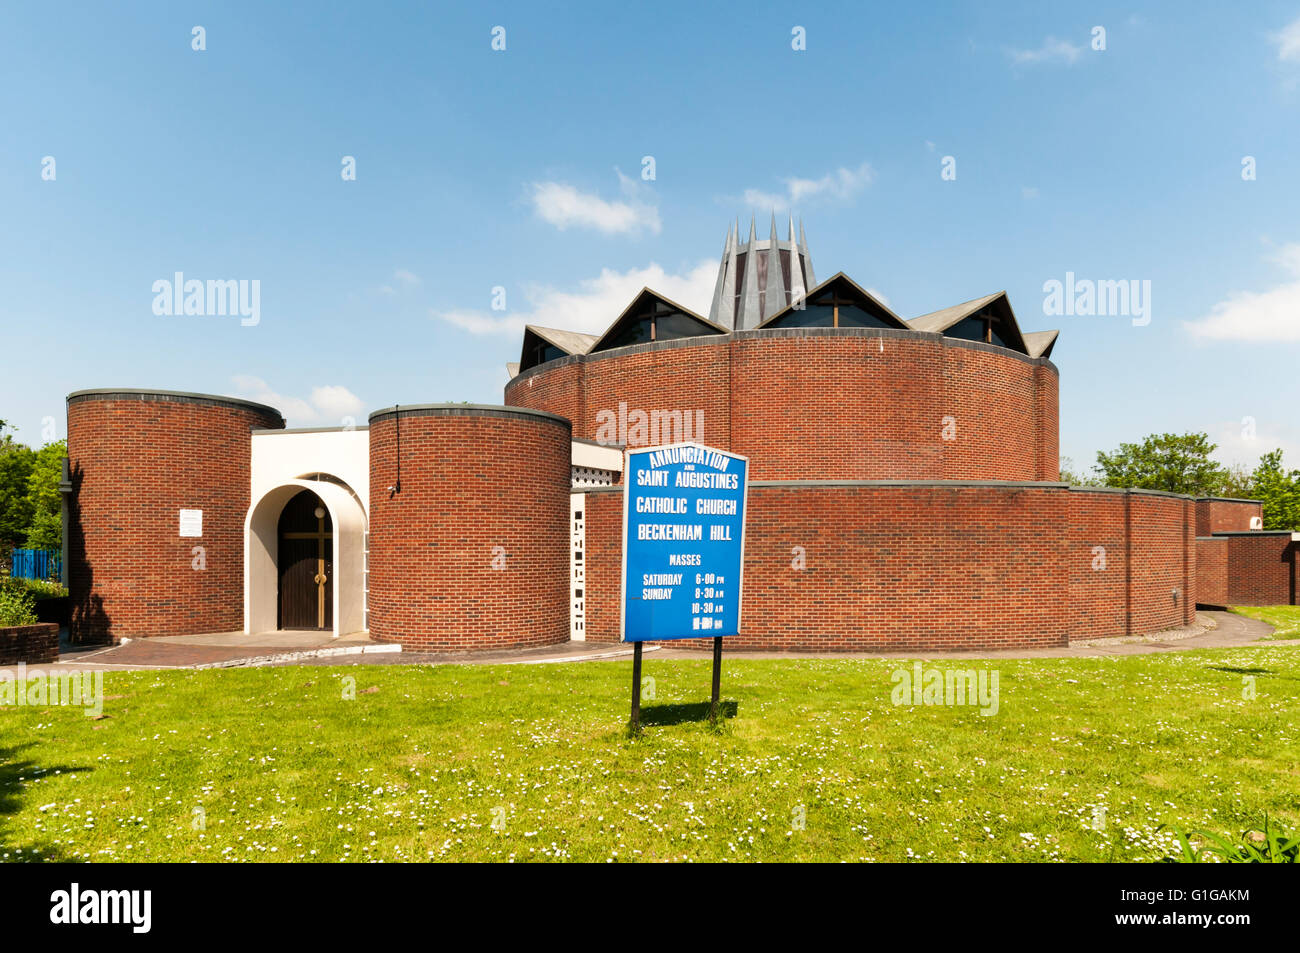 The Annunciation and Saint Augustines Catholic Church in Beckenham Hill was consecrated in 1964. Stock Photo